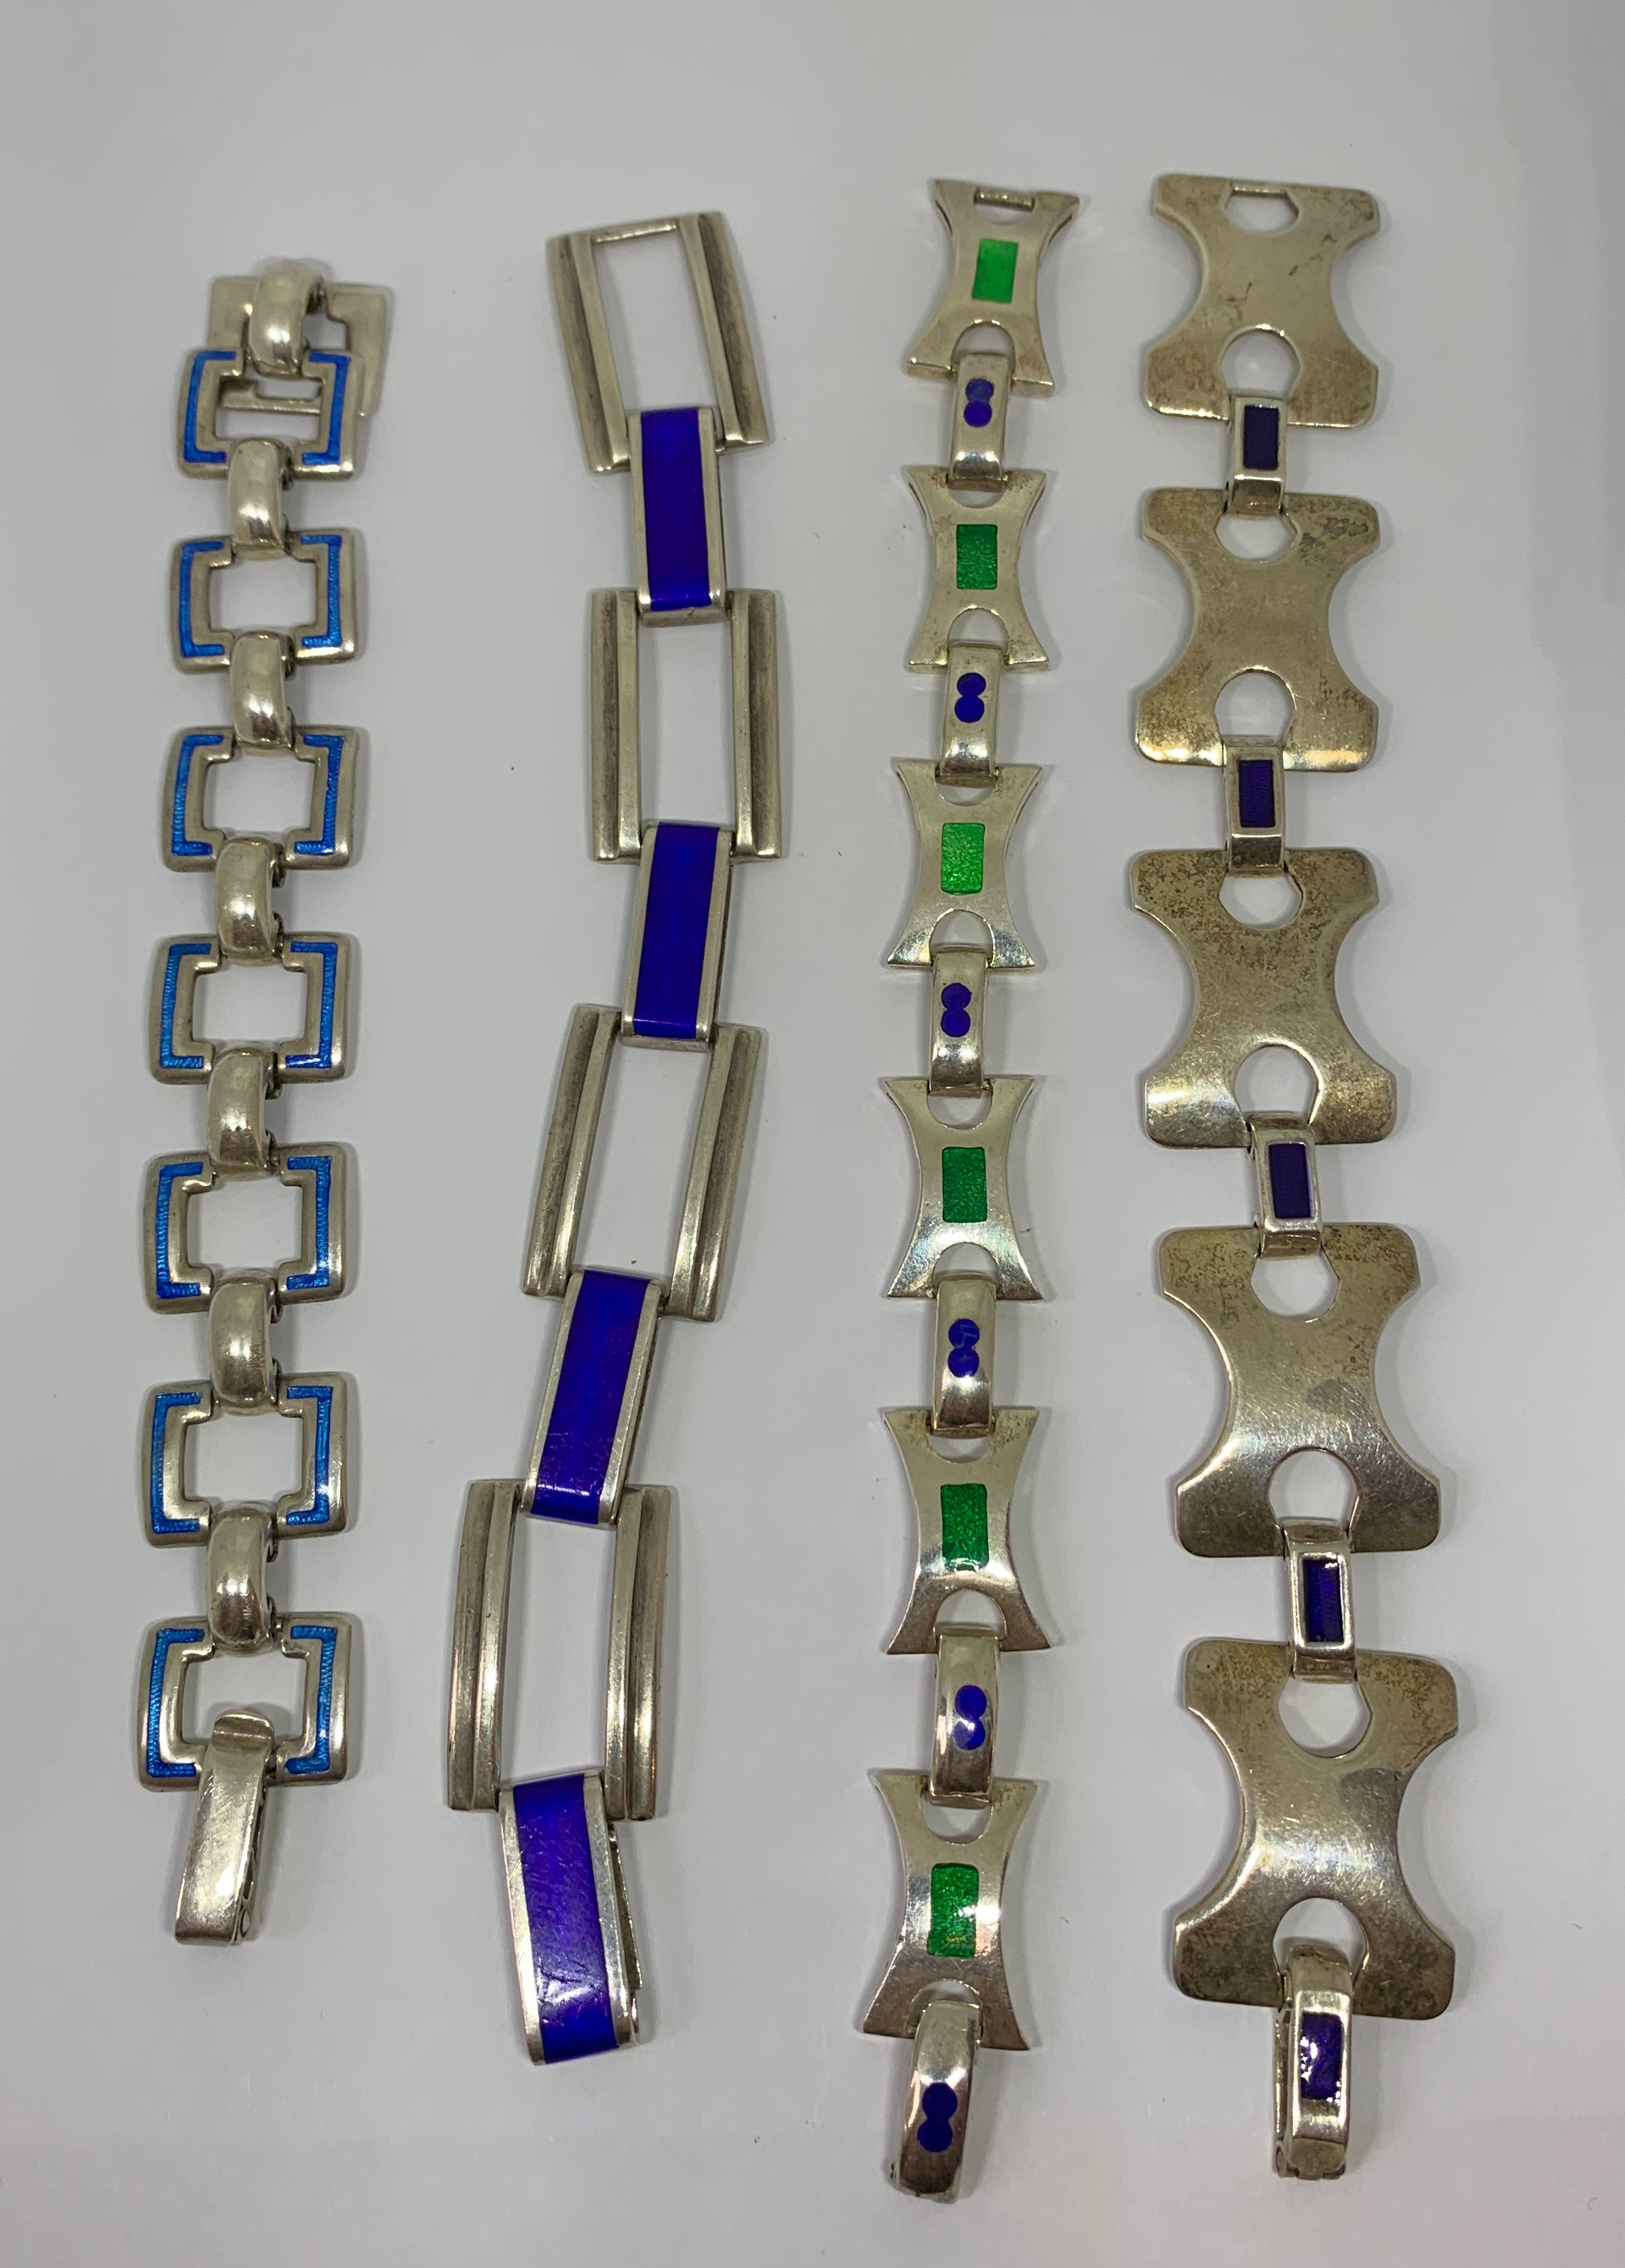 This is an exquisite set of four Mid-Century Modern Bracelets from Italy in Silver with gorgeous blue and green enamel decoration.  The four geometric motif bracelets may be worn together on the arm or singly.  They each have fabulous Mid Century